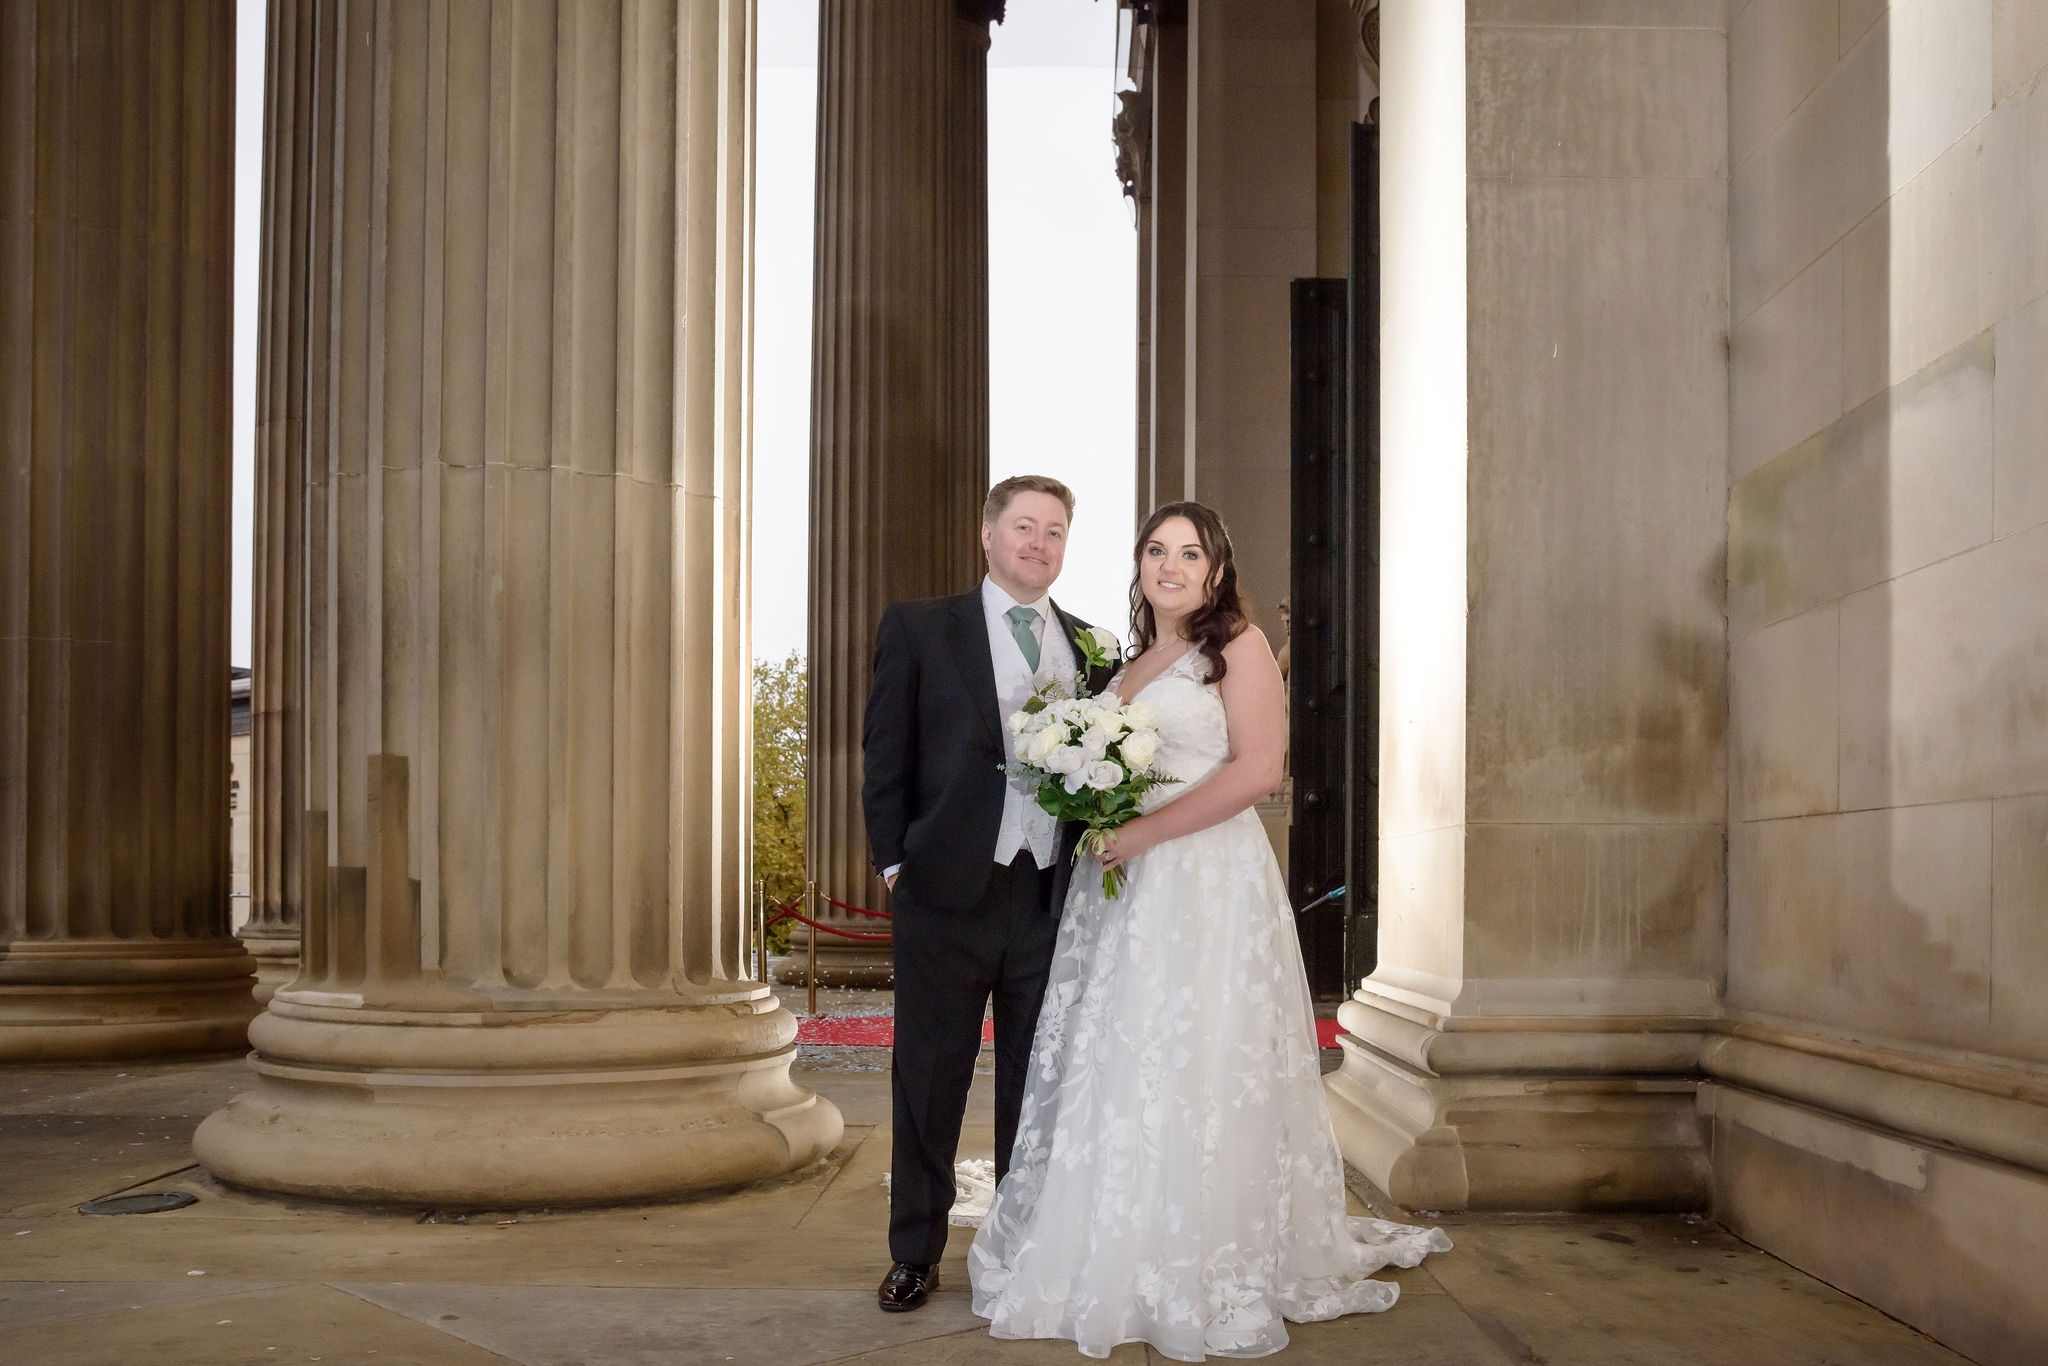 Liverpool Wedding Photography | Bride & Groom at St. George's Hall, Love captured by Michael Pardoe, Runcorn, Cheshire